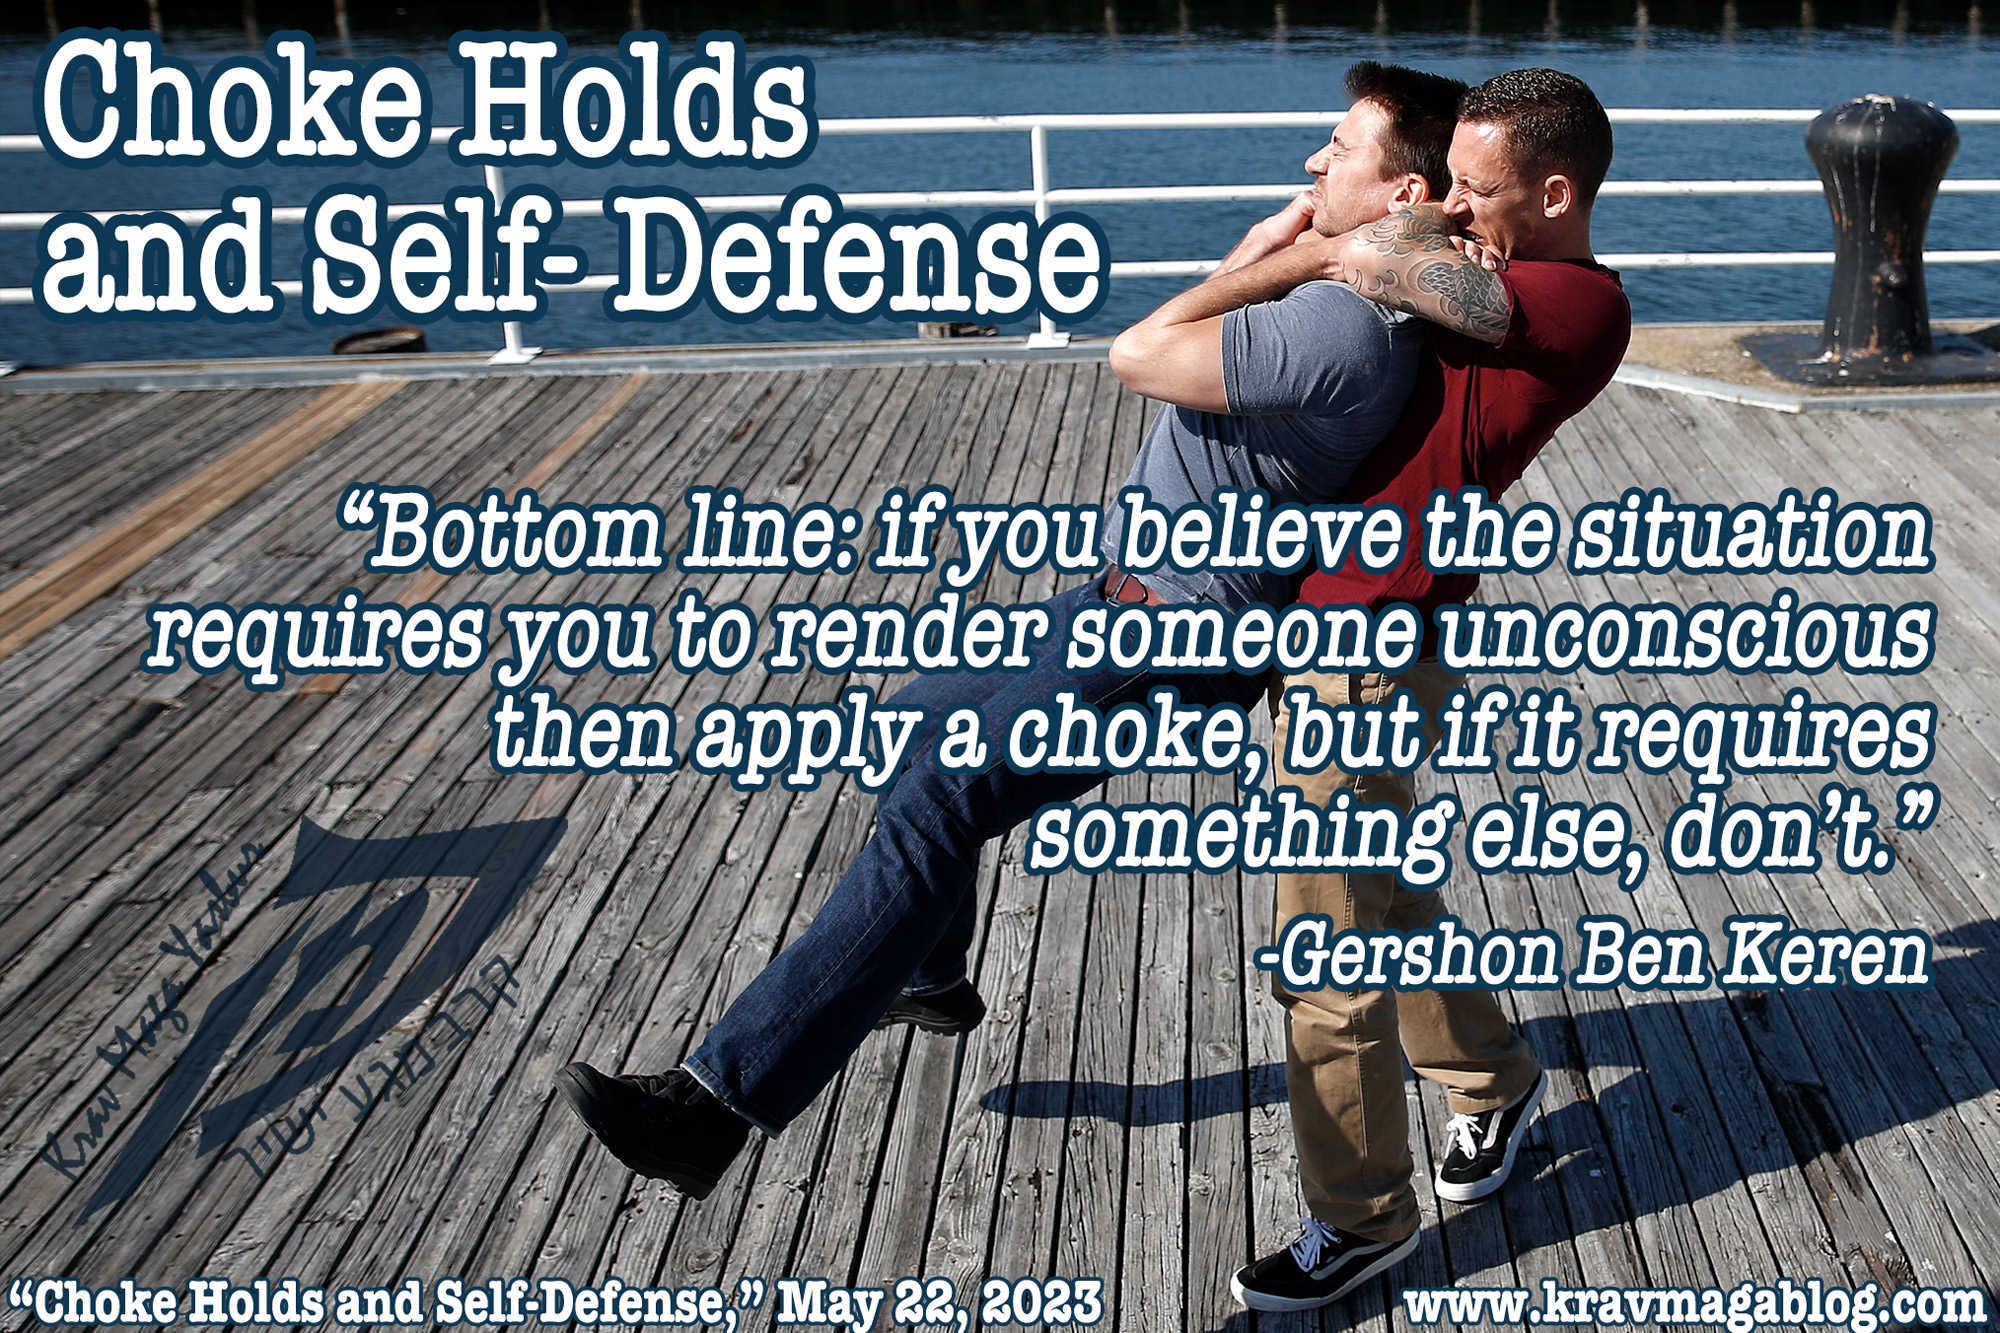 Blog About Choke Holds And Self-Defense